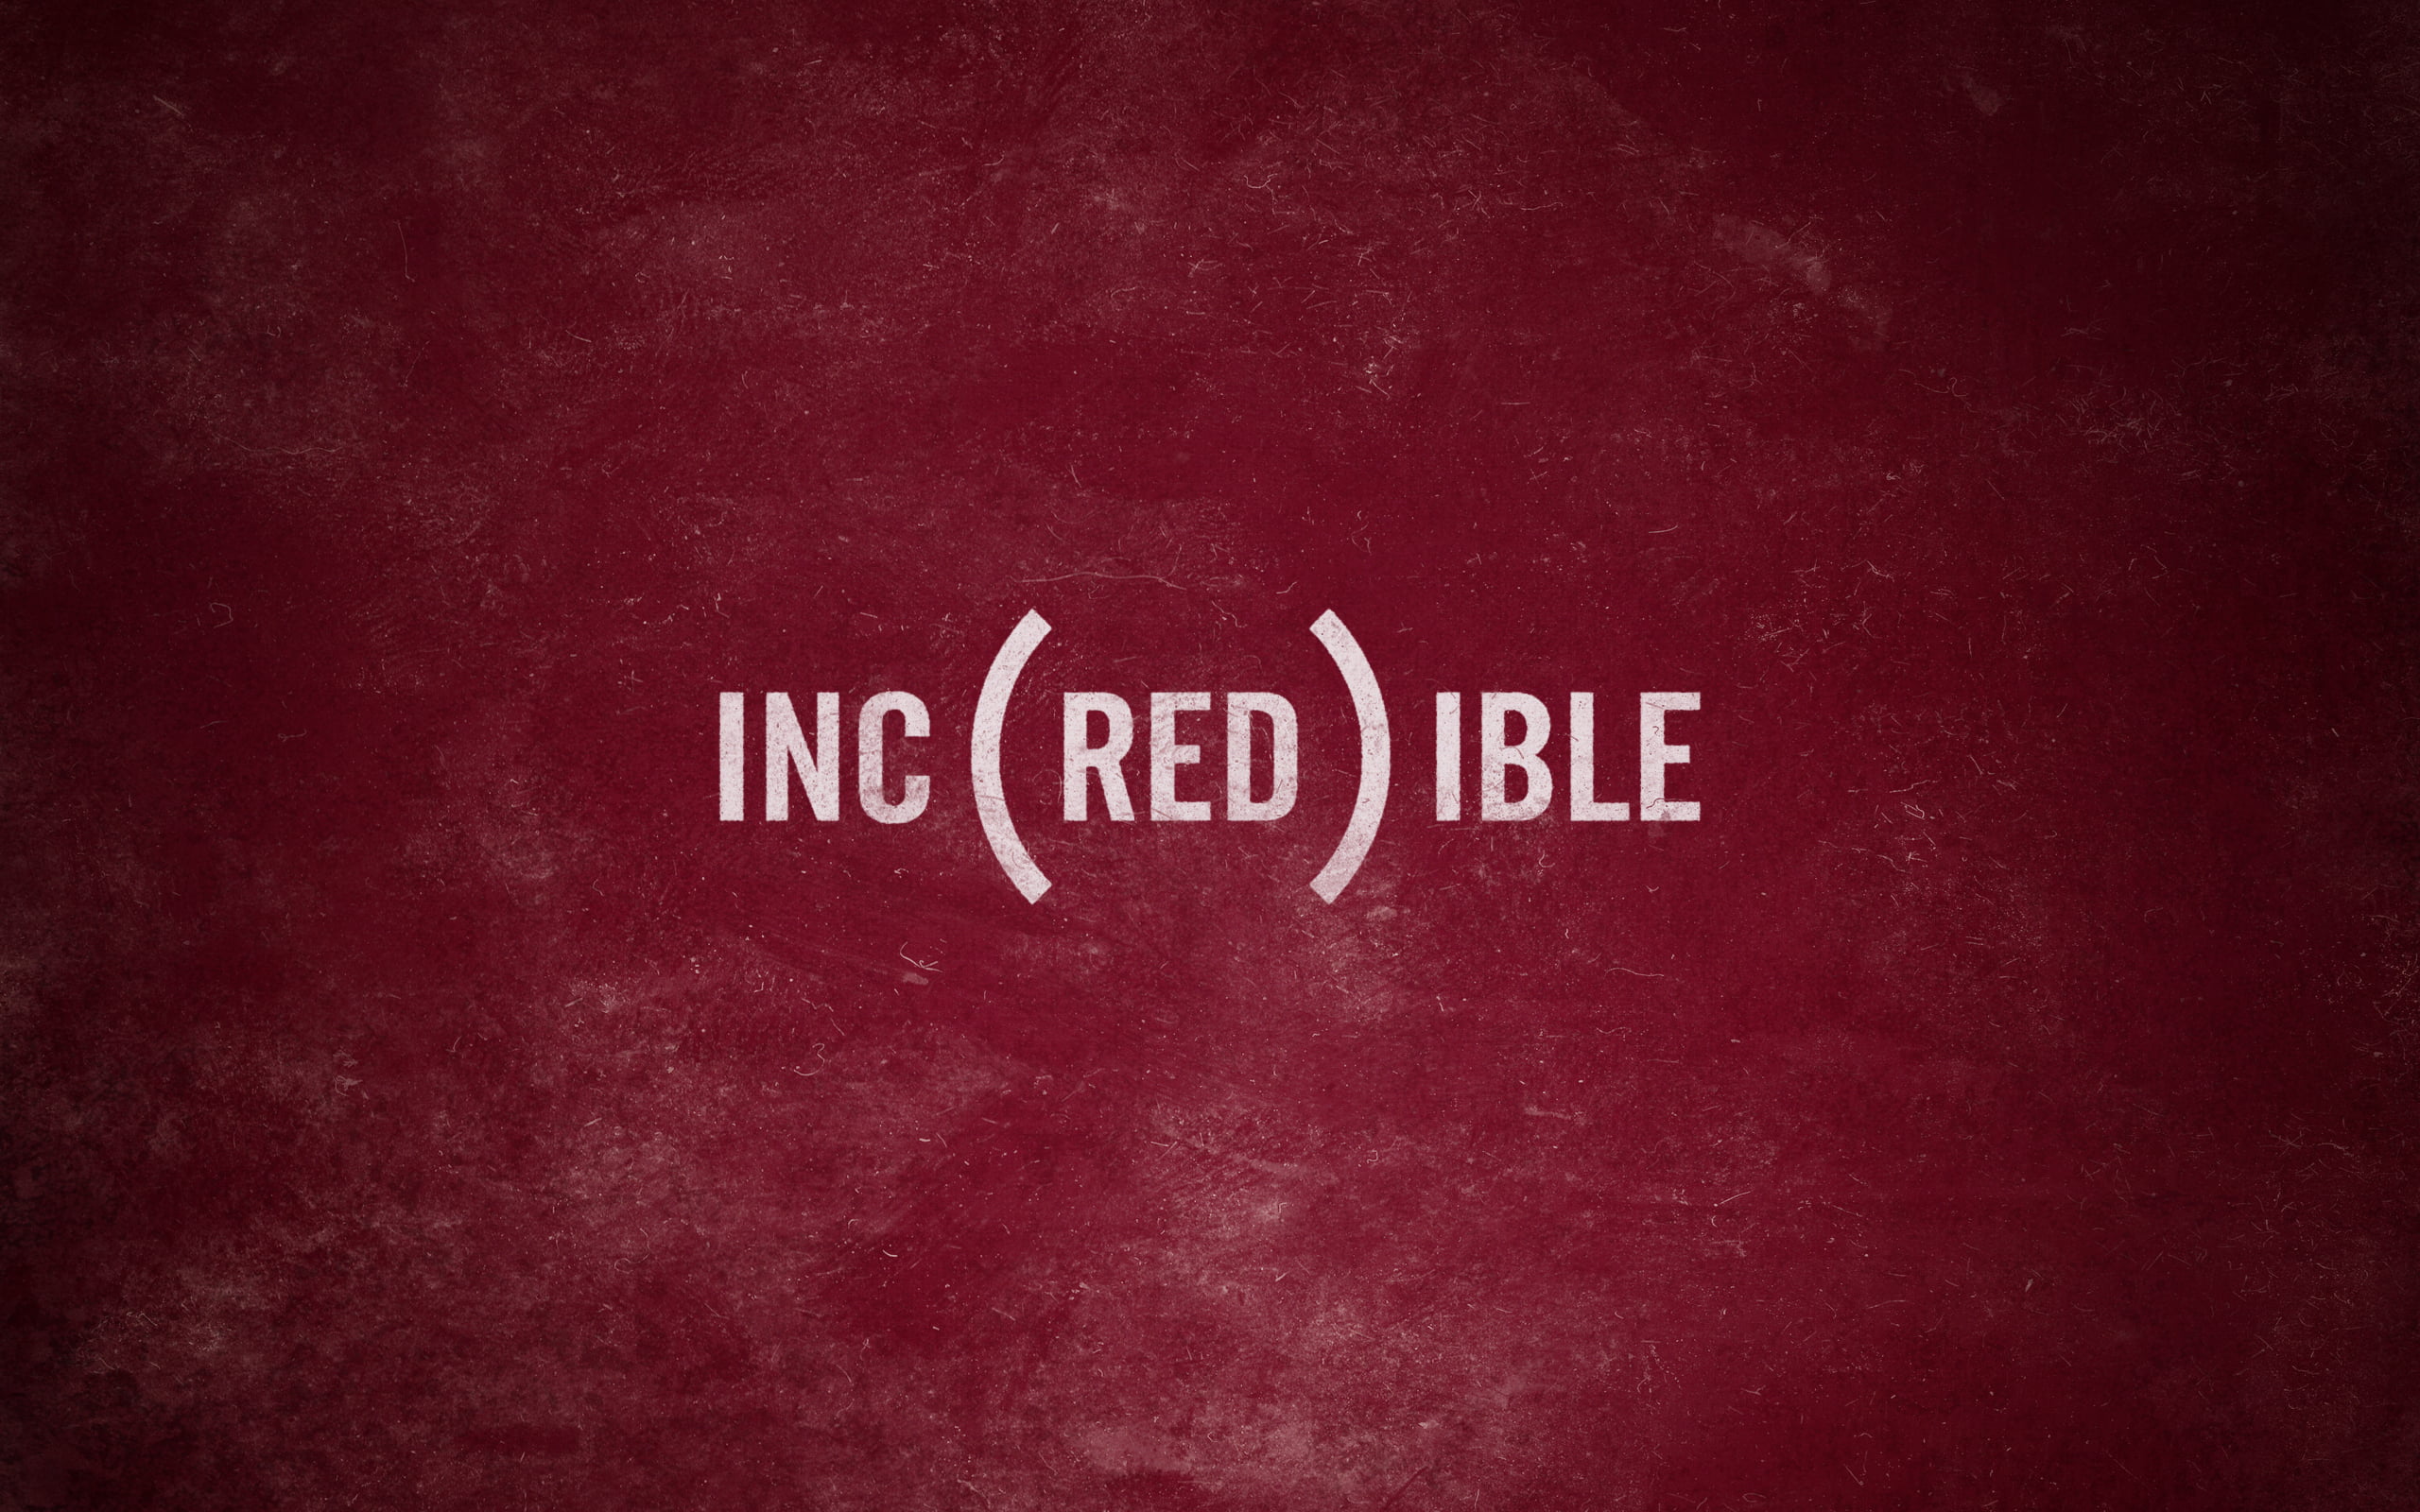 Inc (red) ible text, fading, The inscription, western script